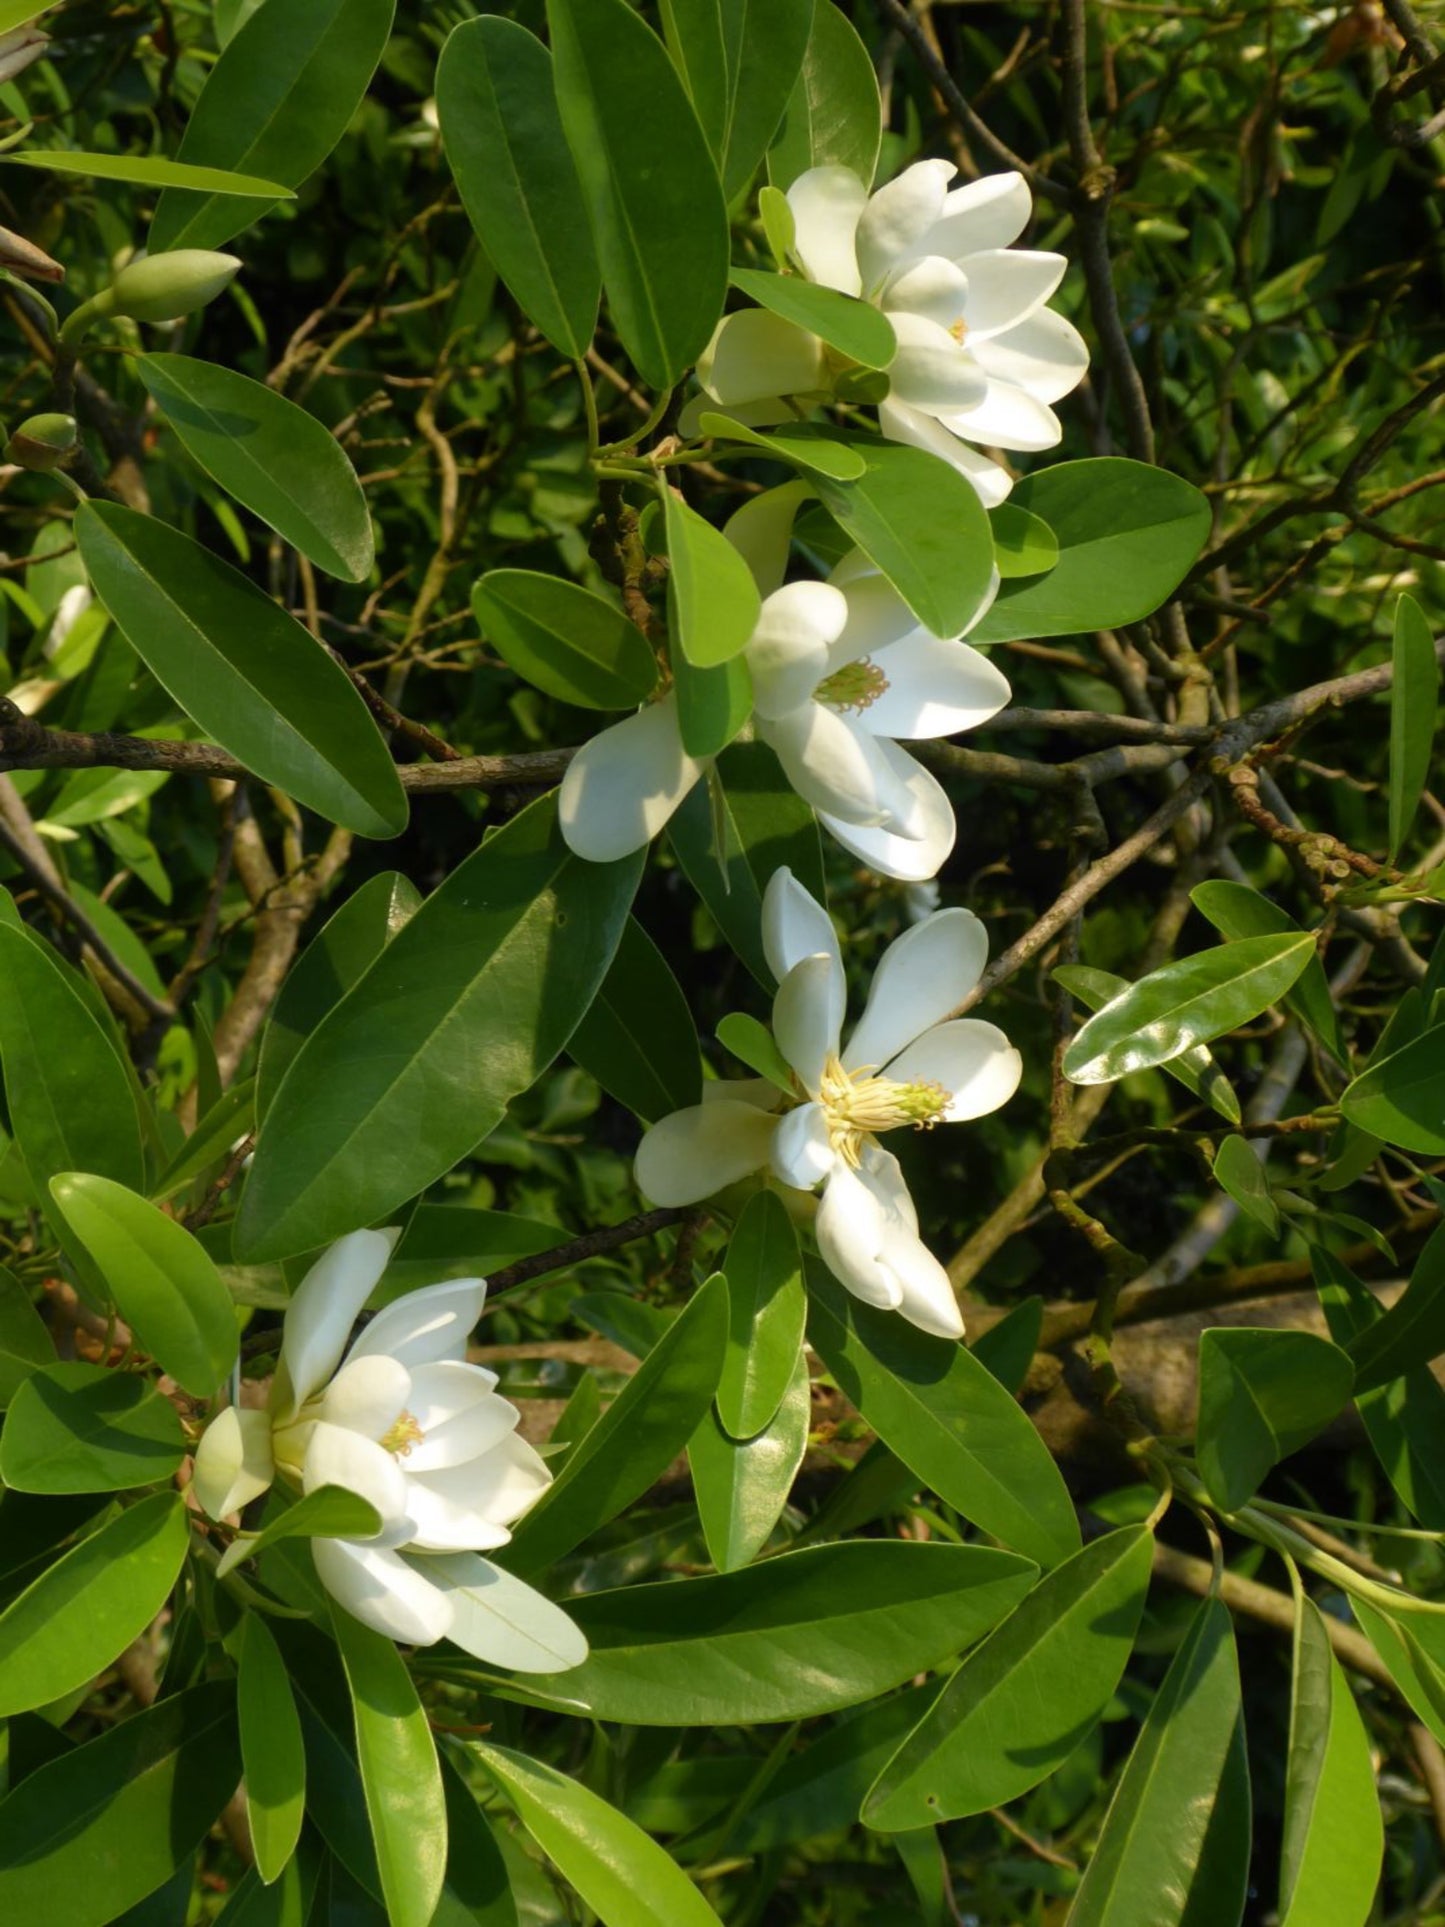 magnolia virginiana is an important host plant for tiger swallowtail butterfly